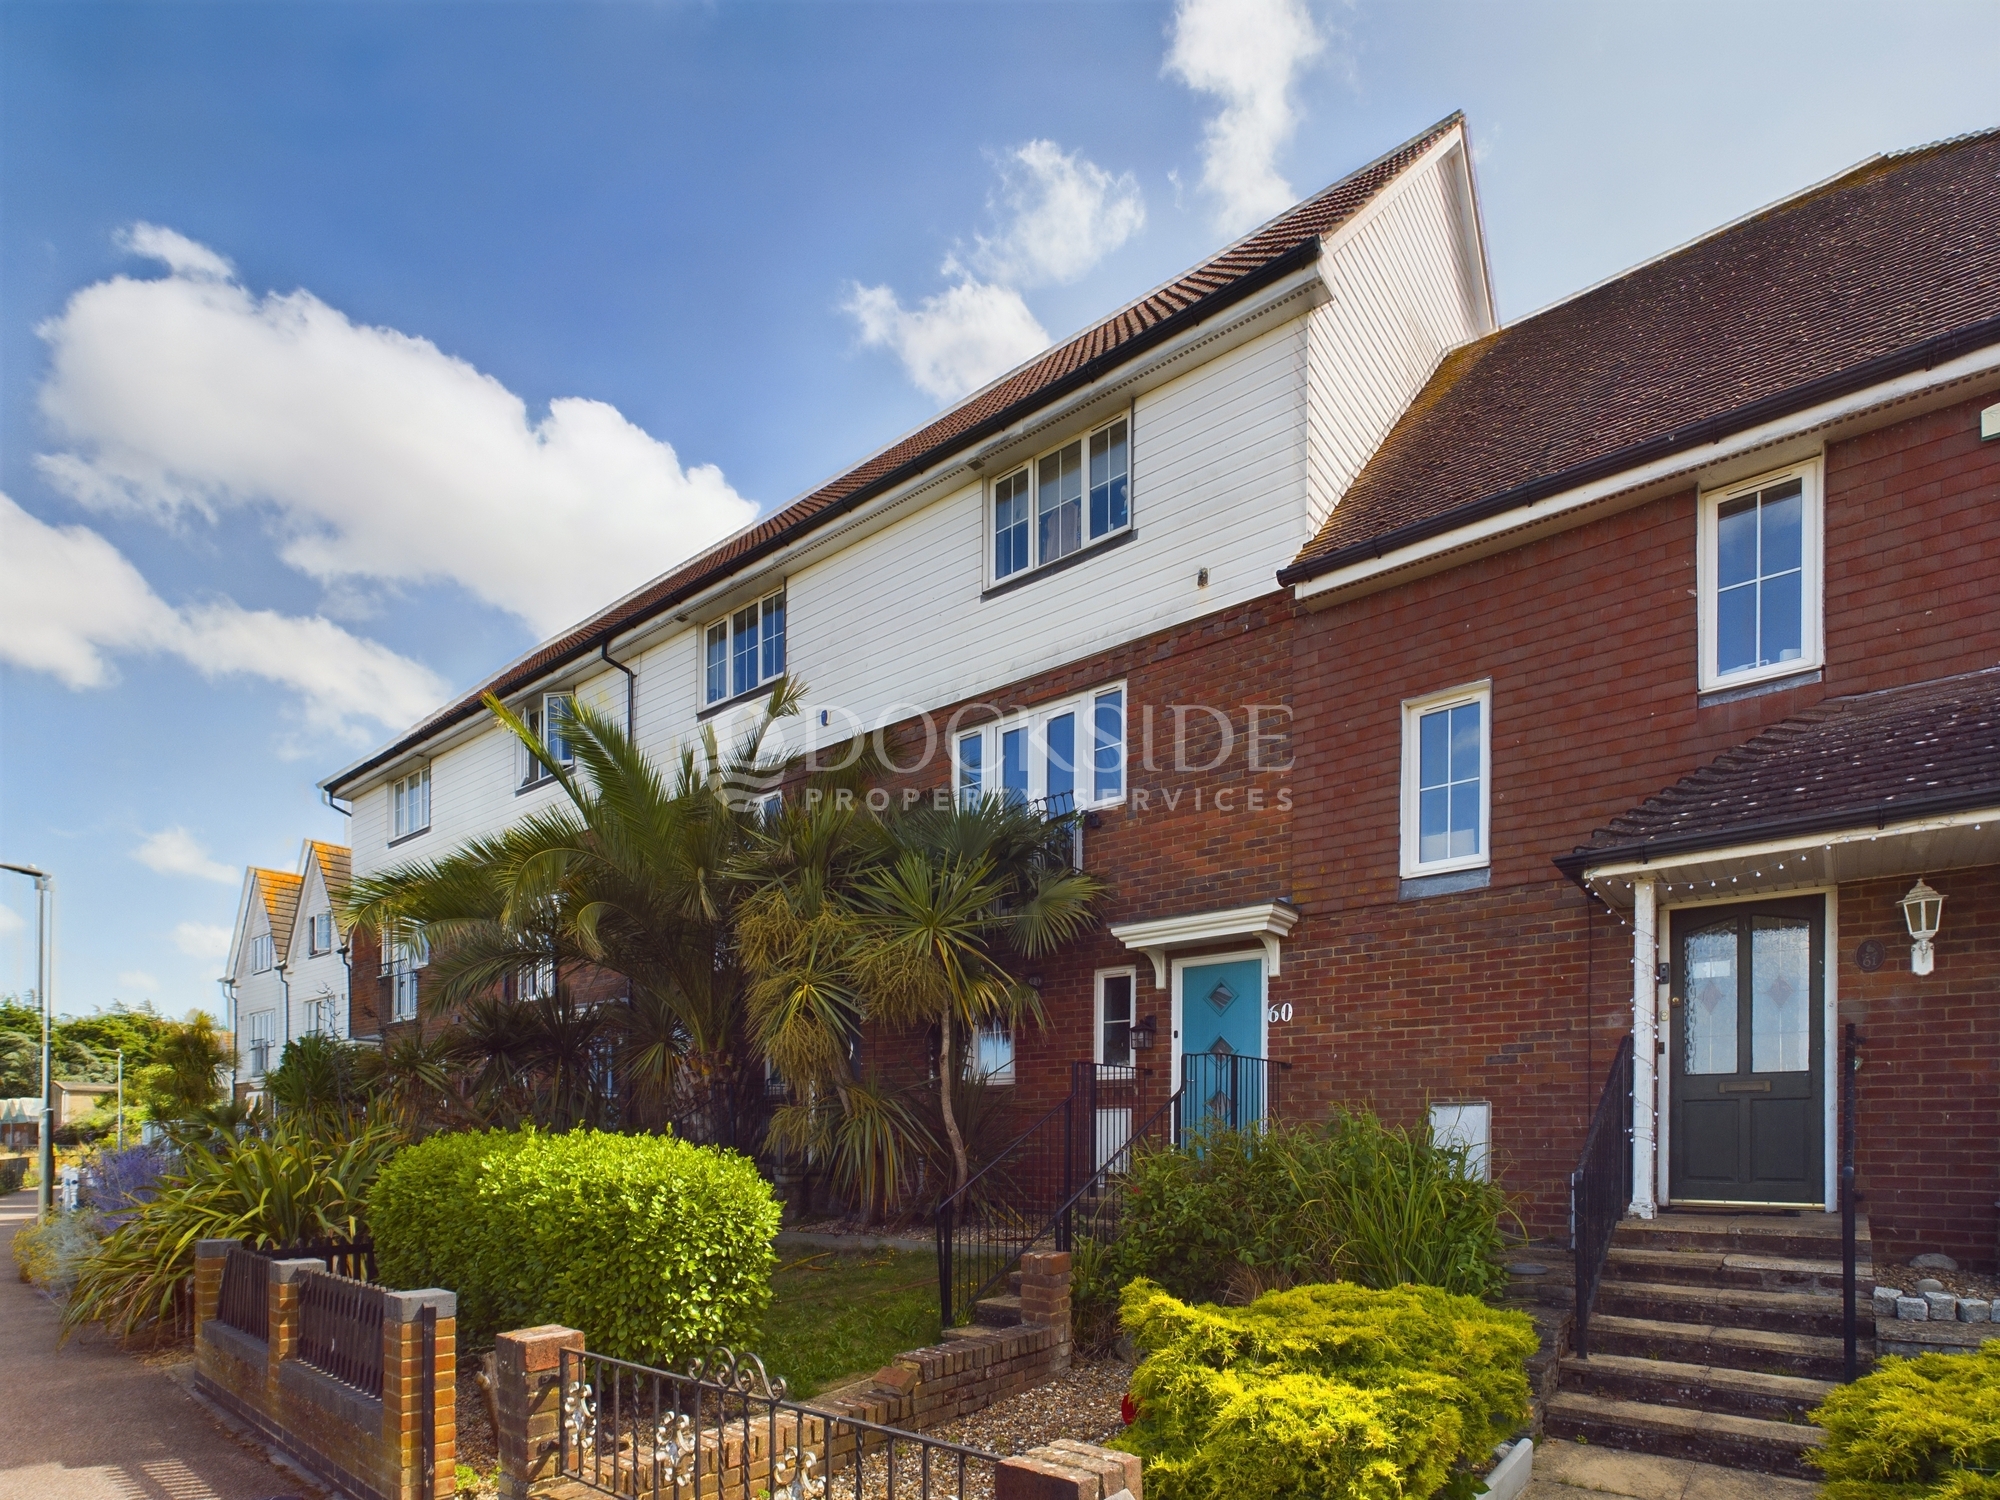 3 bed house for sale in Waterside Lane, Gillingham, ME7 